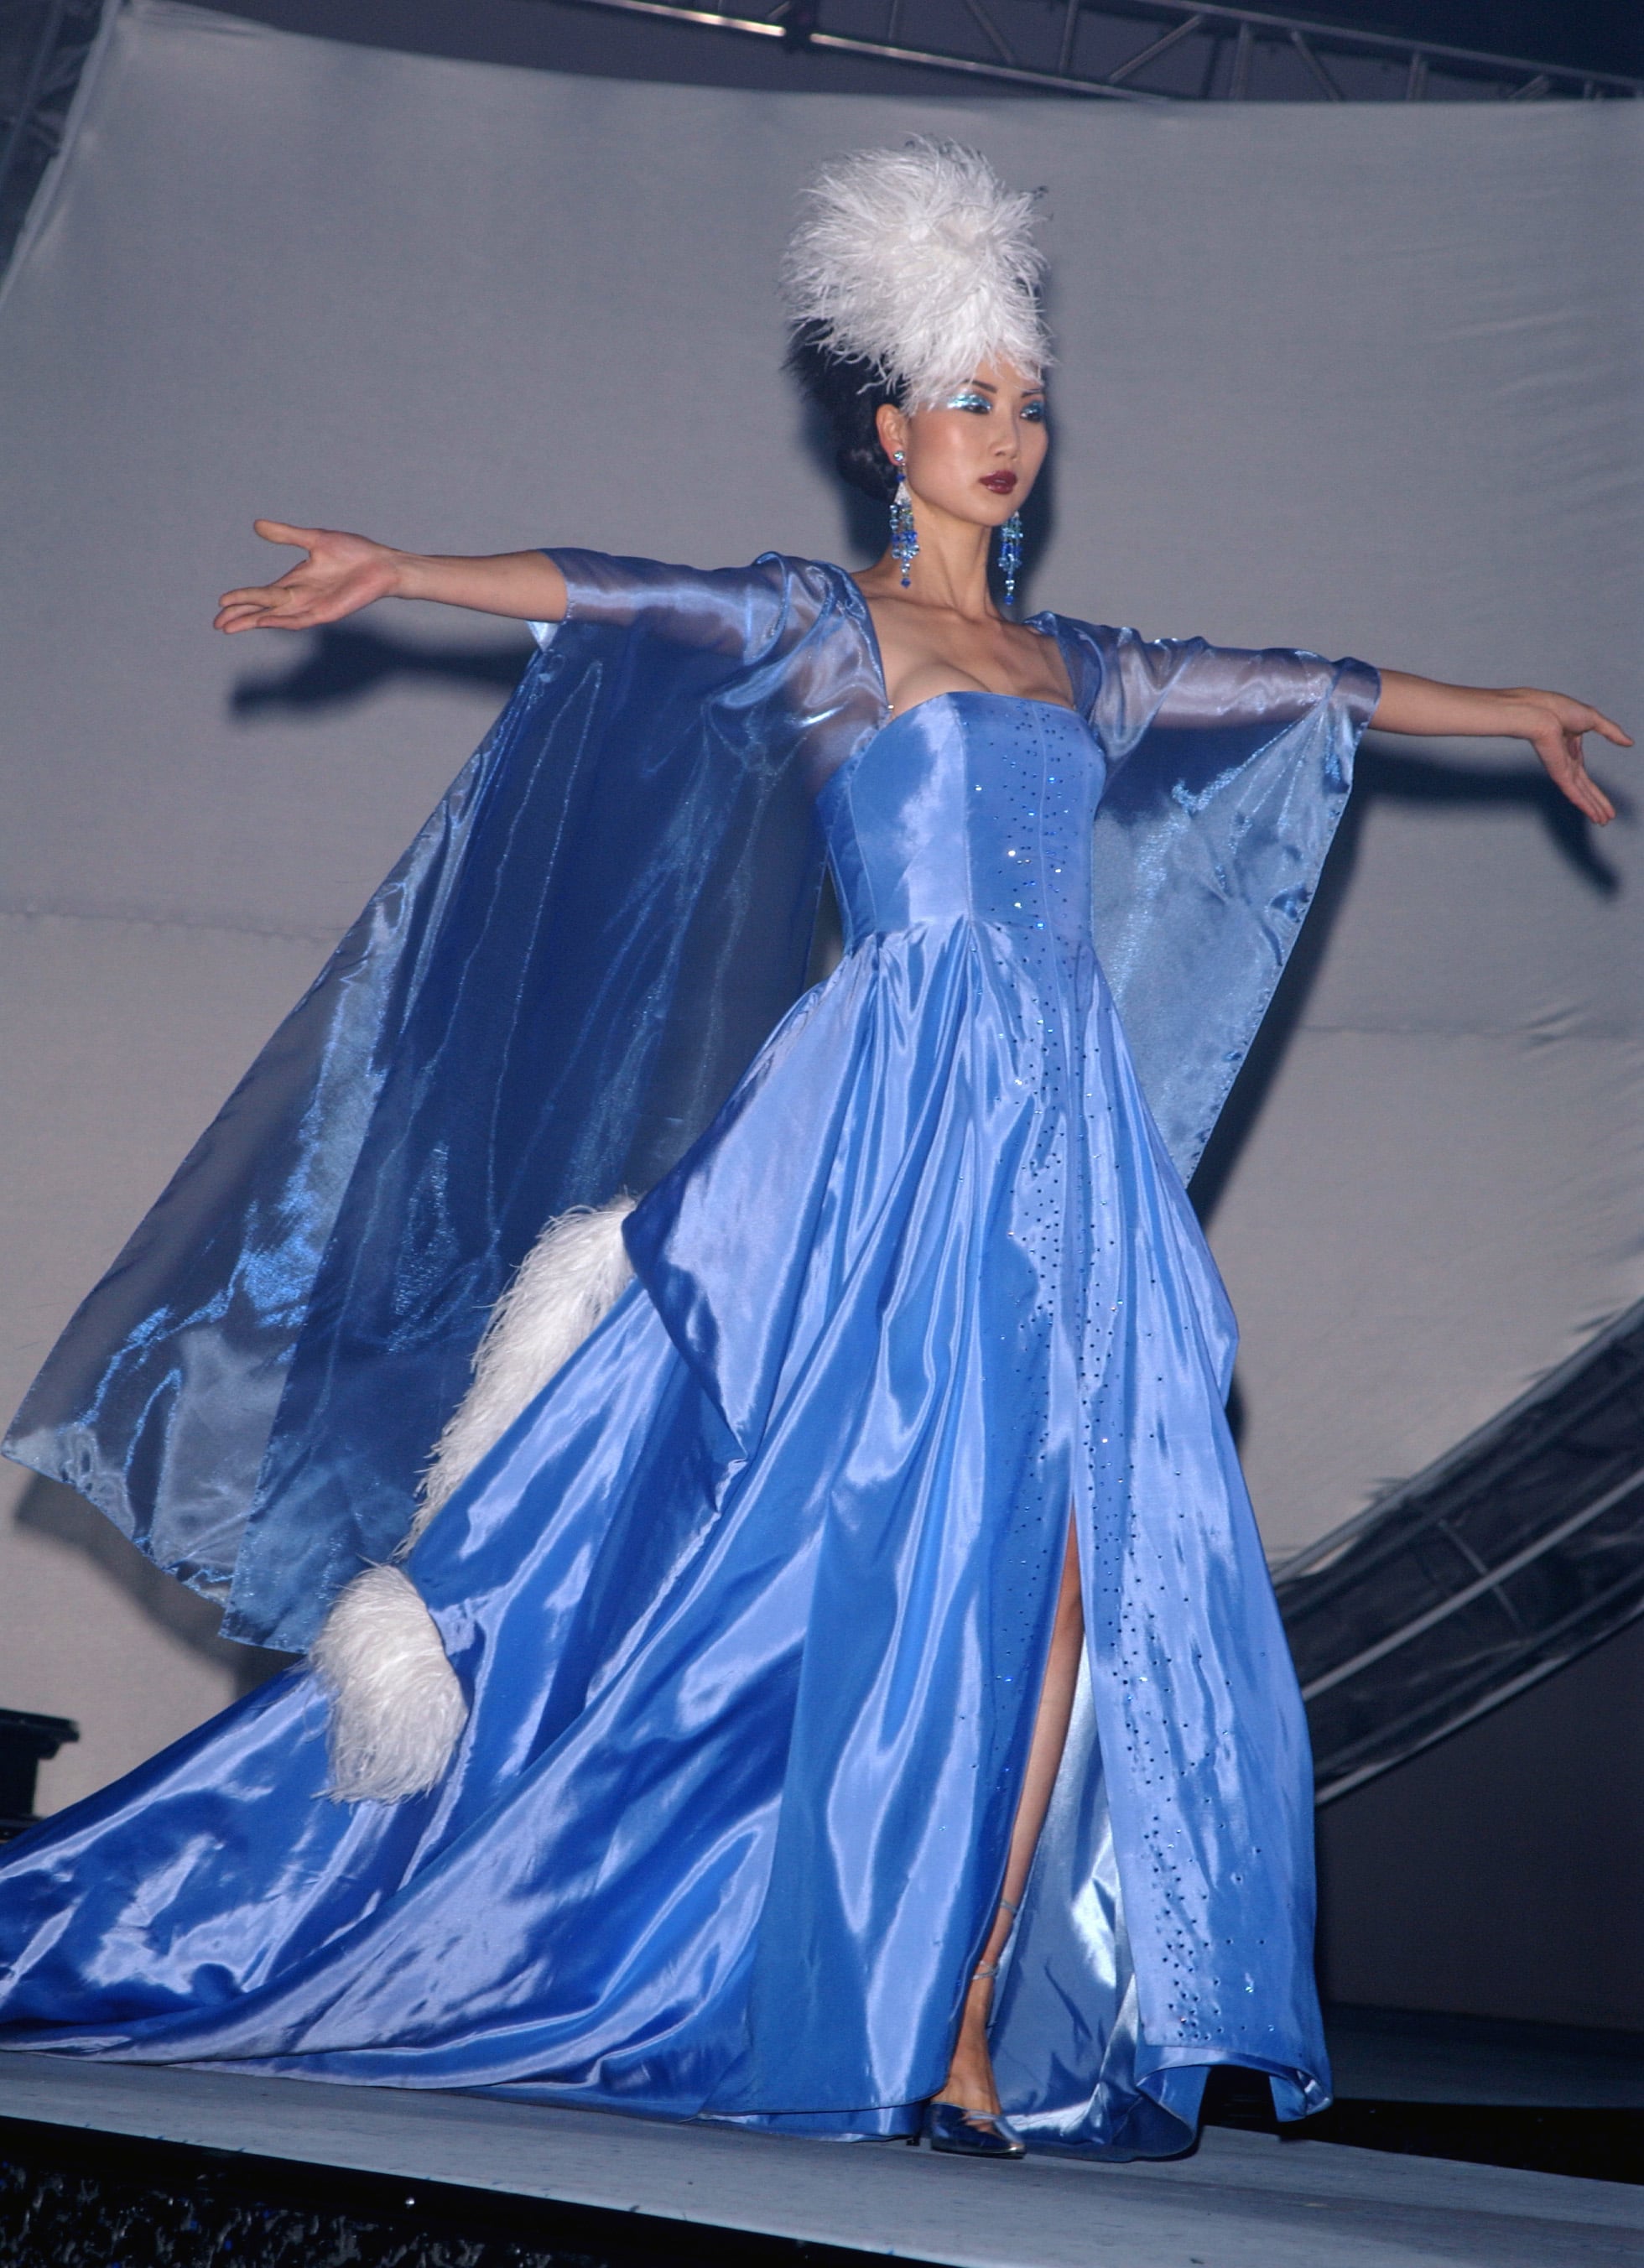 Model wearing a gown by Jessica McClintock at Macy's and American Express Passport '01 fashion show and HIV/AIDS fundraising bash. (Photo by Frank Trapper/Corbis via Getty Images)